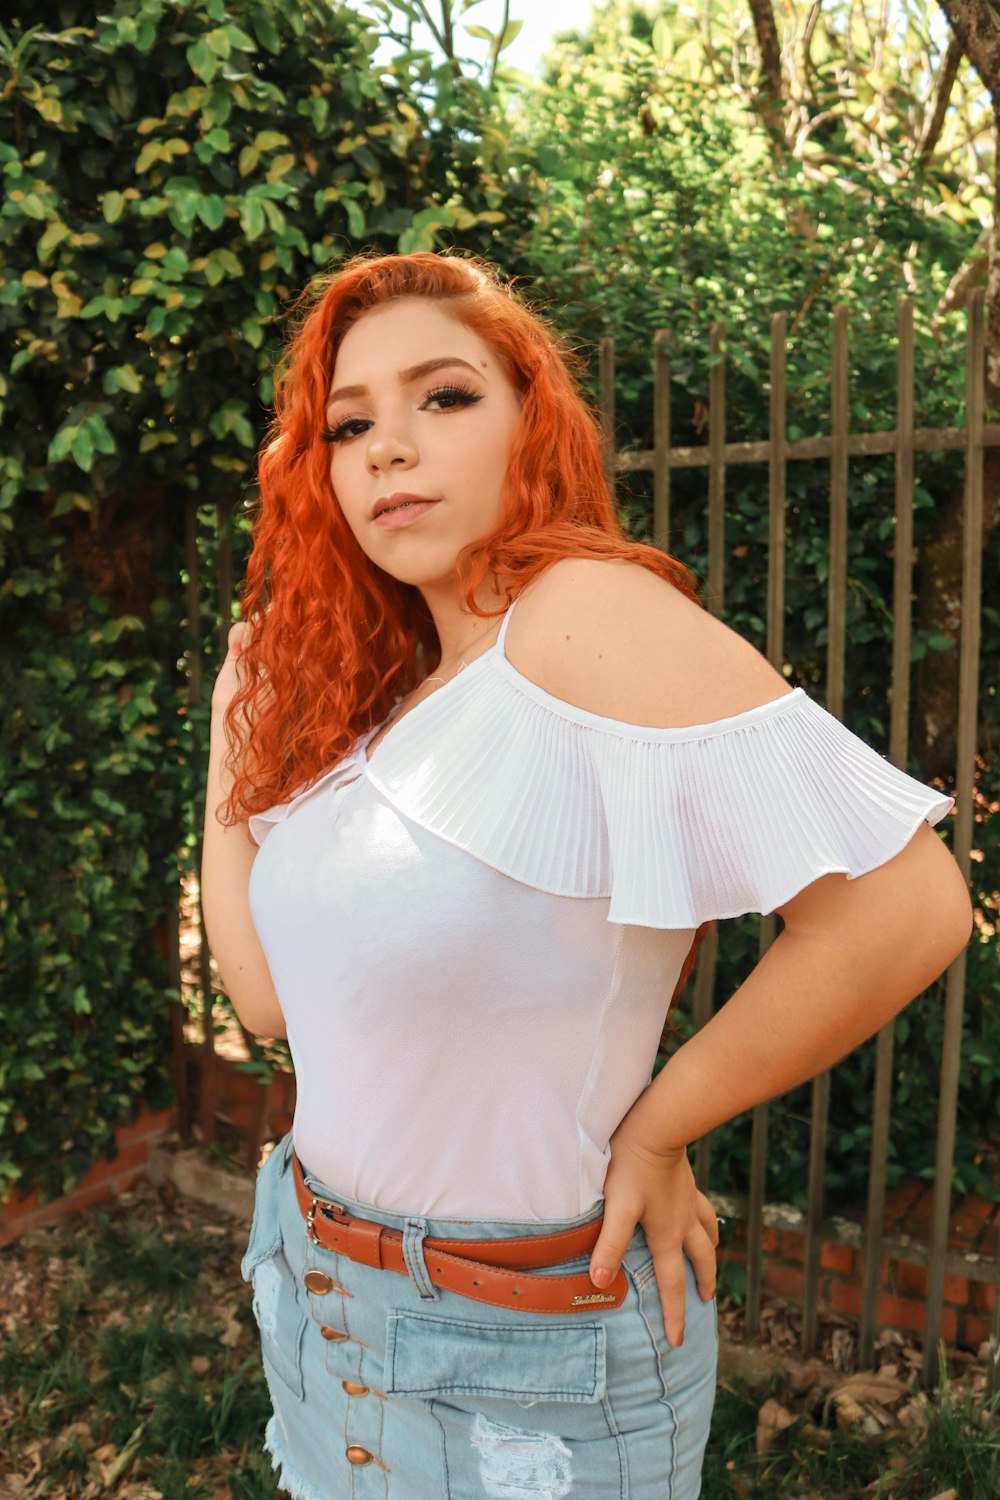 a woman with red hair wearing a white top